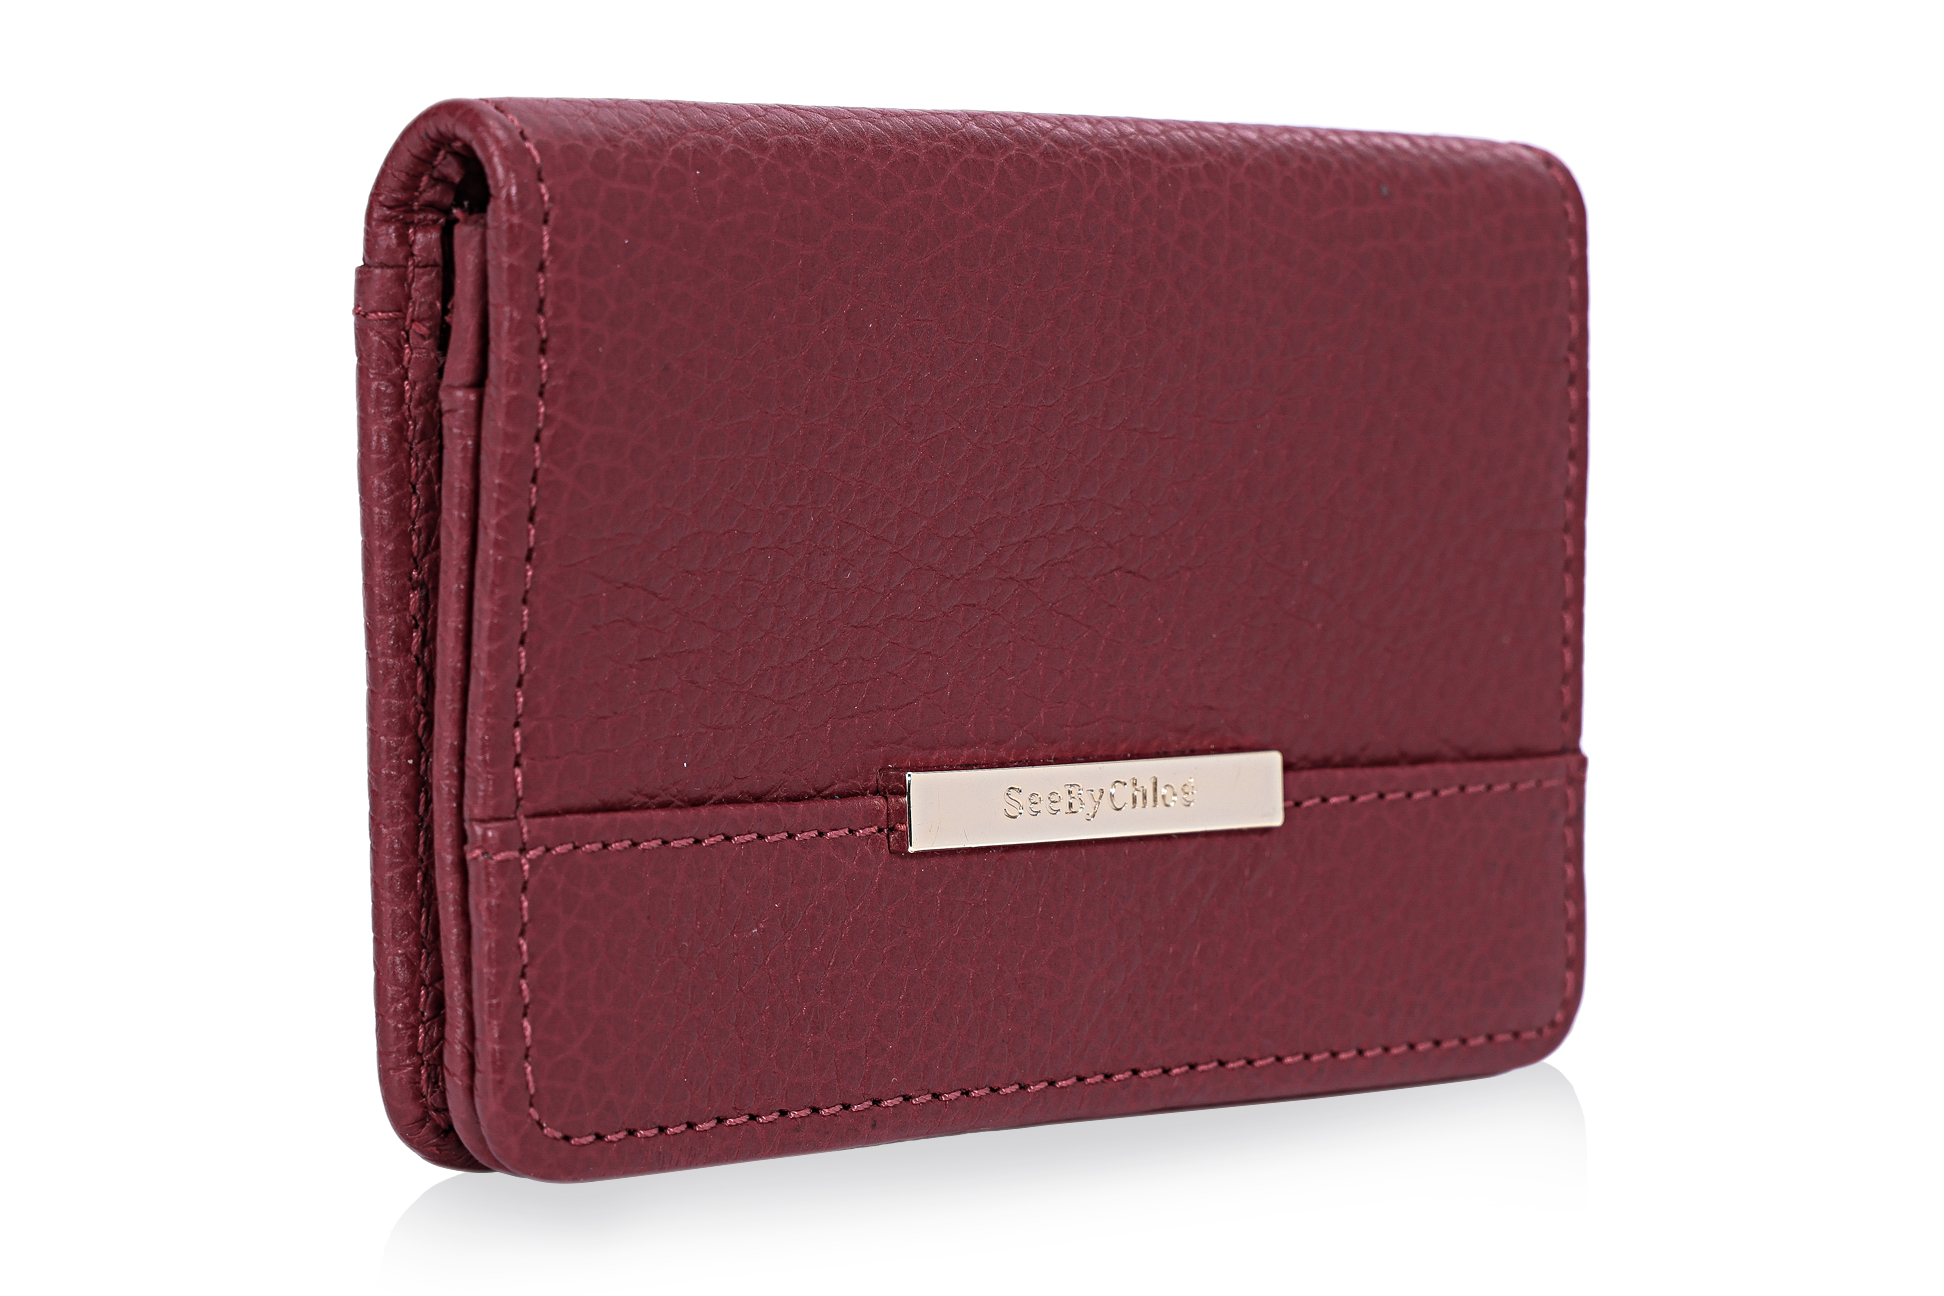 A SEE BY CHLOÉ FLAP CARD HOLDER - Image 2 of 4